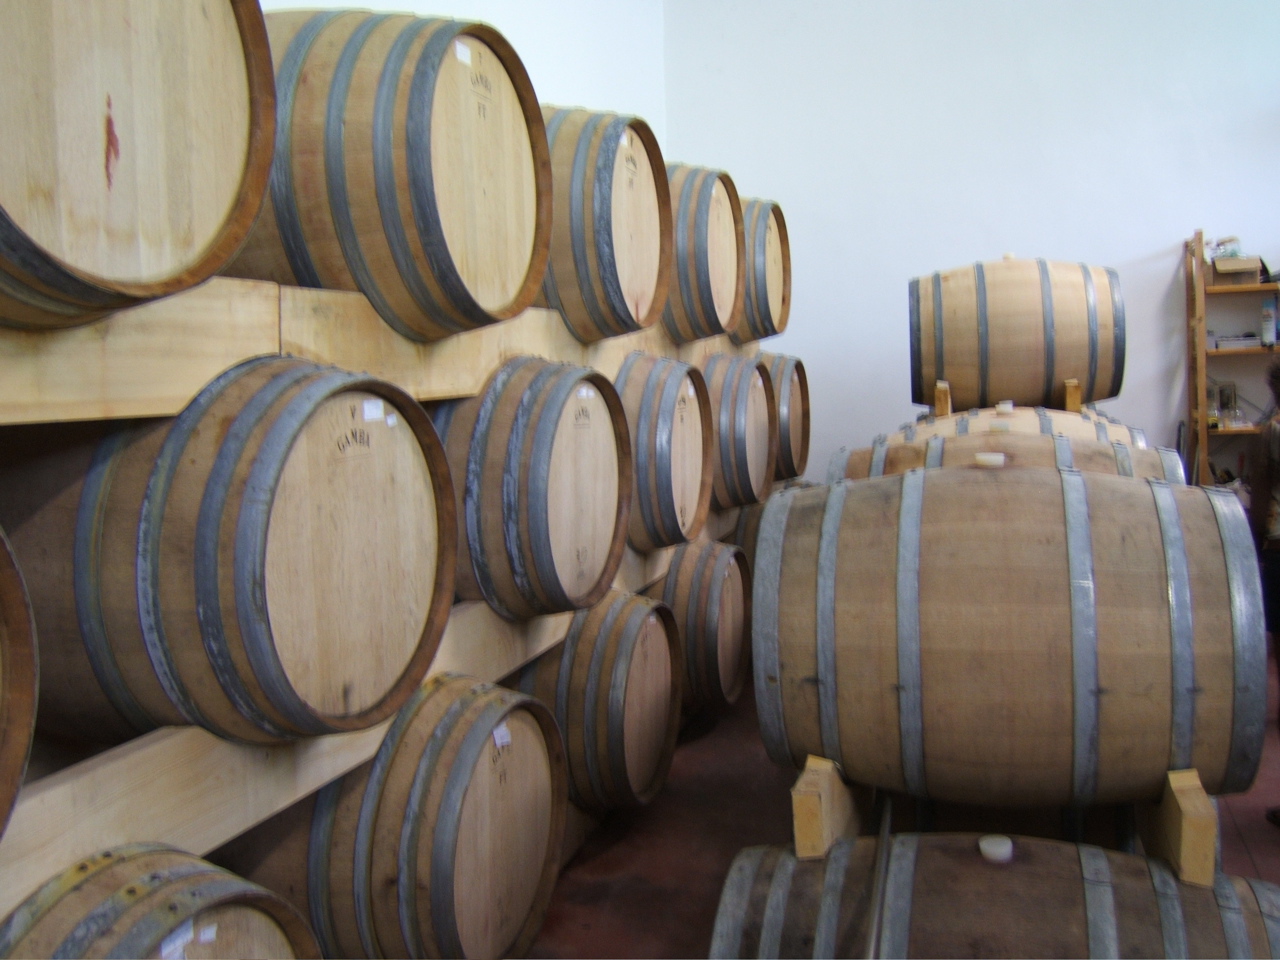 several stacks of wine barrels in the cellar